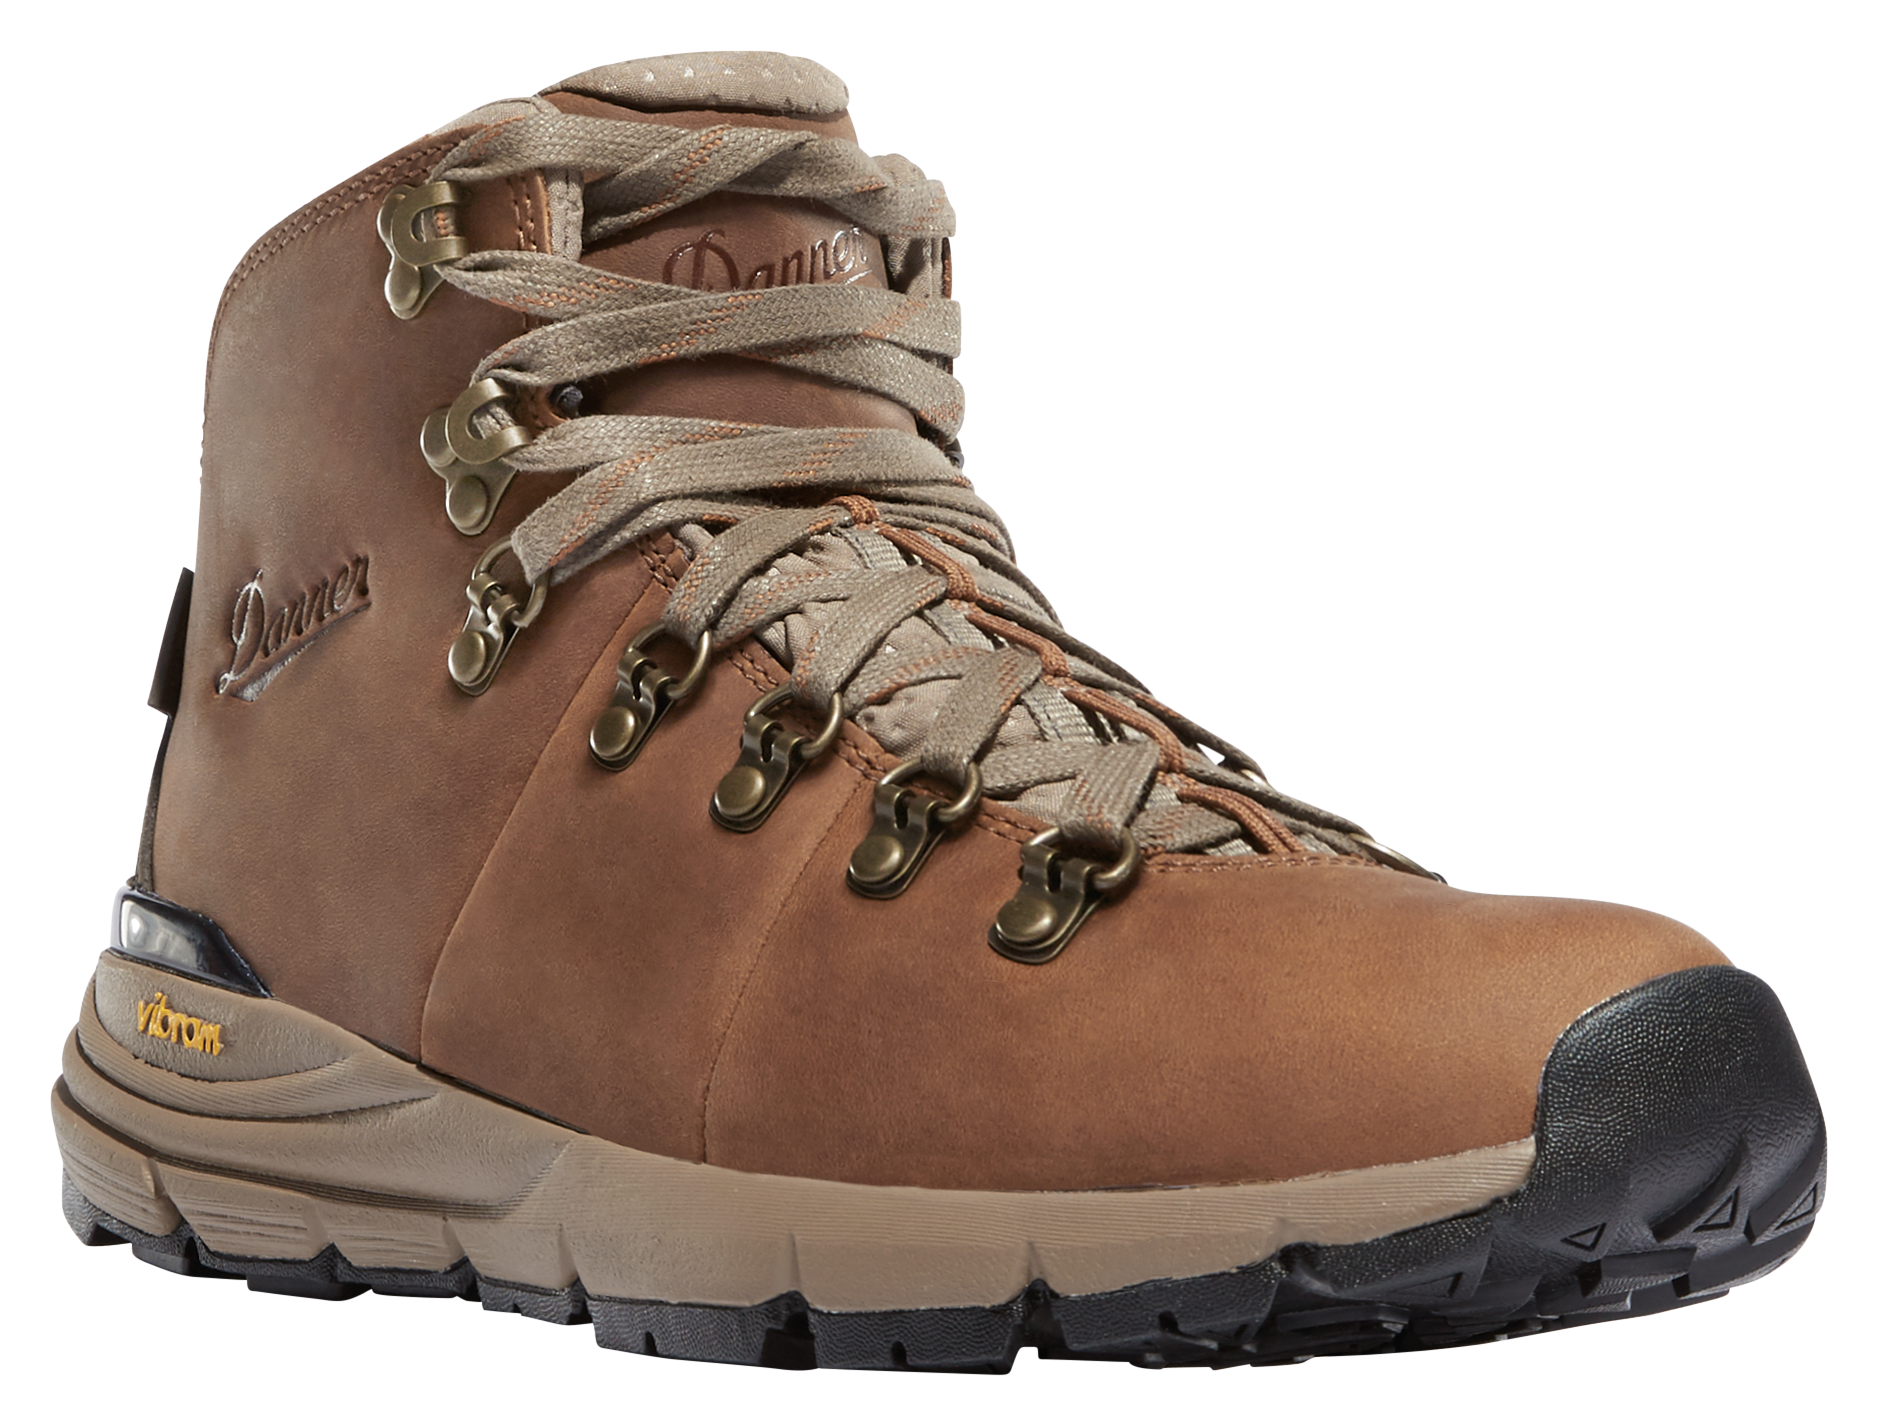 Danner Mountain 600 Leather Waterproof Hiking Boots for Ladies - Rich Brown - 6.5M